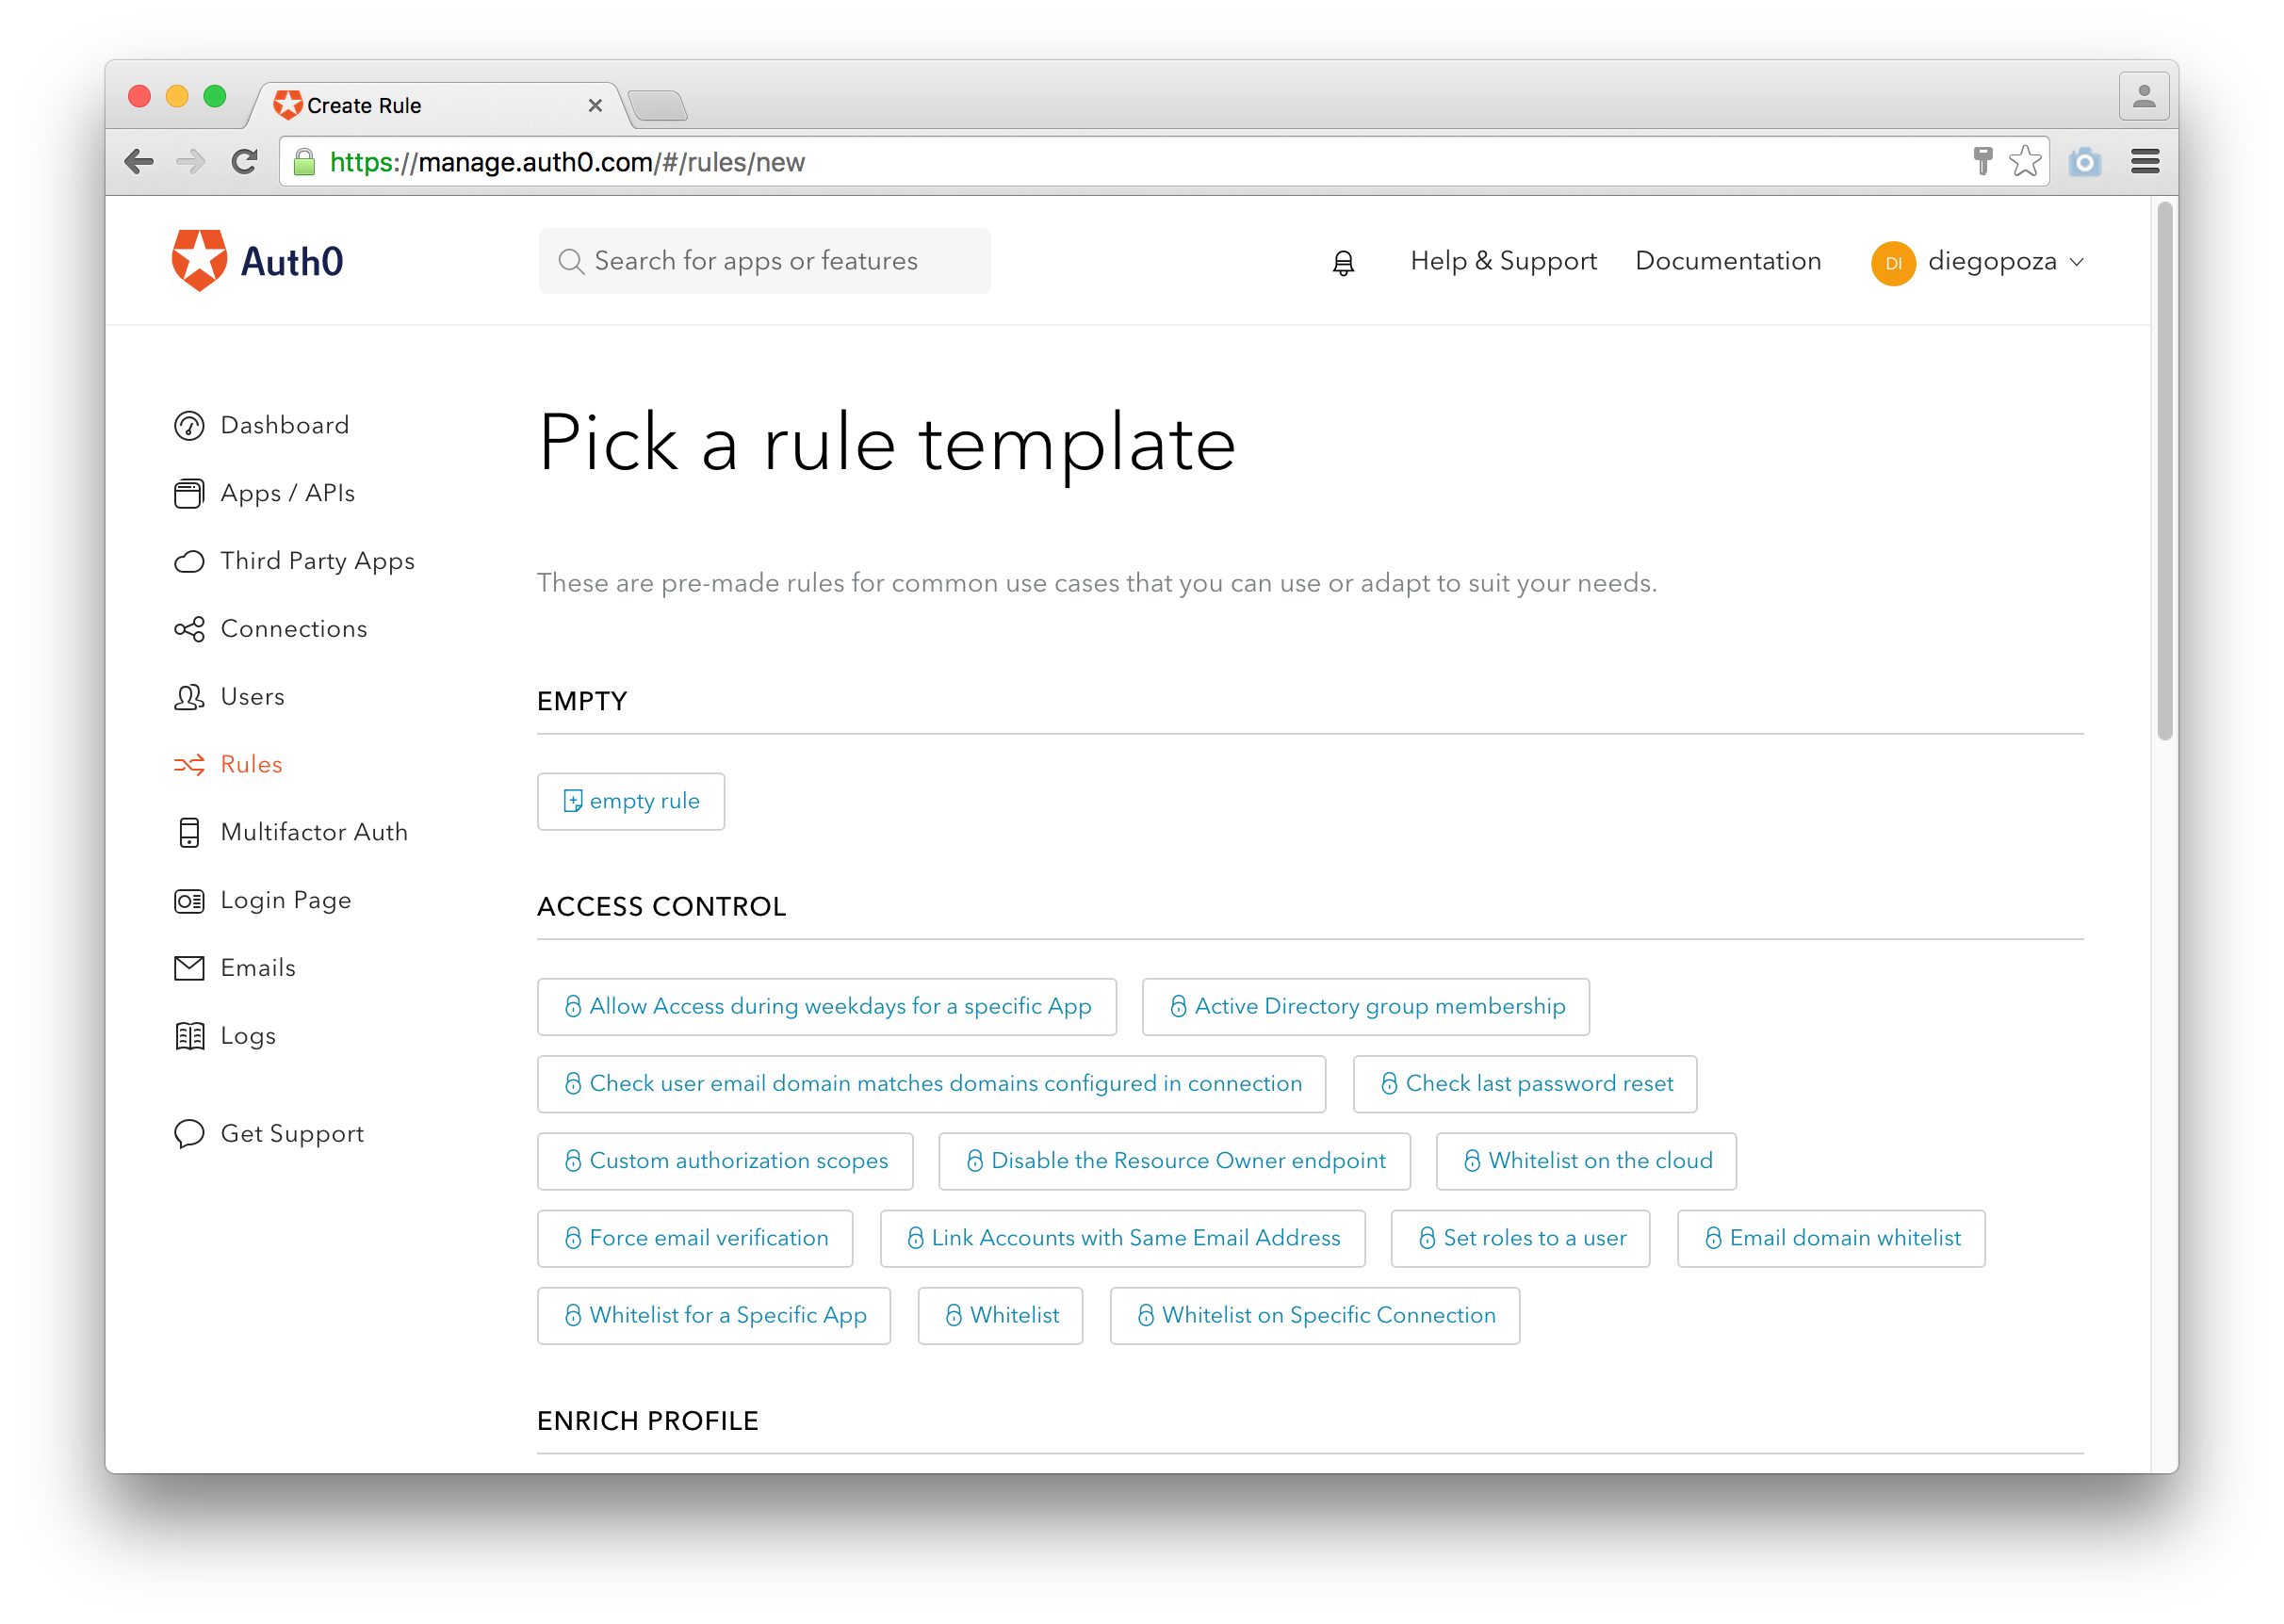 Creating a new rule using templates